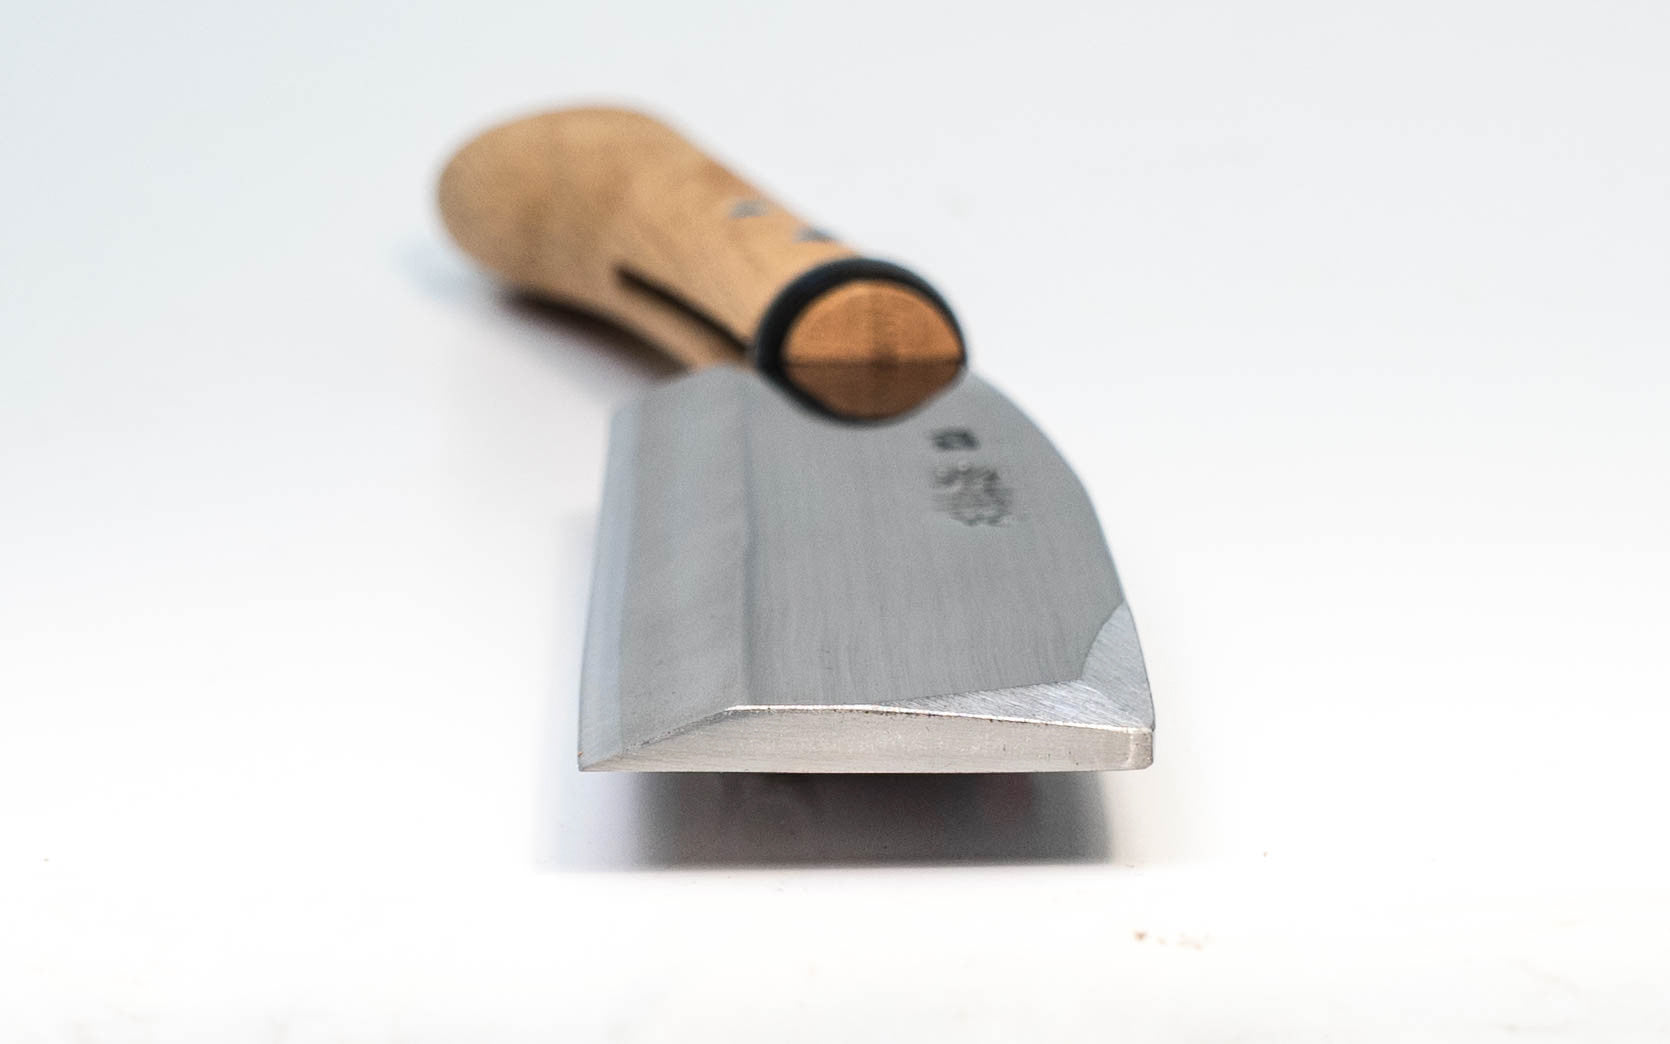 Japanese Forged Laminated Froe-Knife ~ Made in Japan · Hand forged laminated steel head ~ Tempered to HRC 63 ~ Single bevel edge - razor sharp ~ 7-1/8" cutting edge ~ 1/4" extra thick back of blade